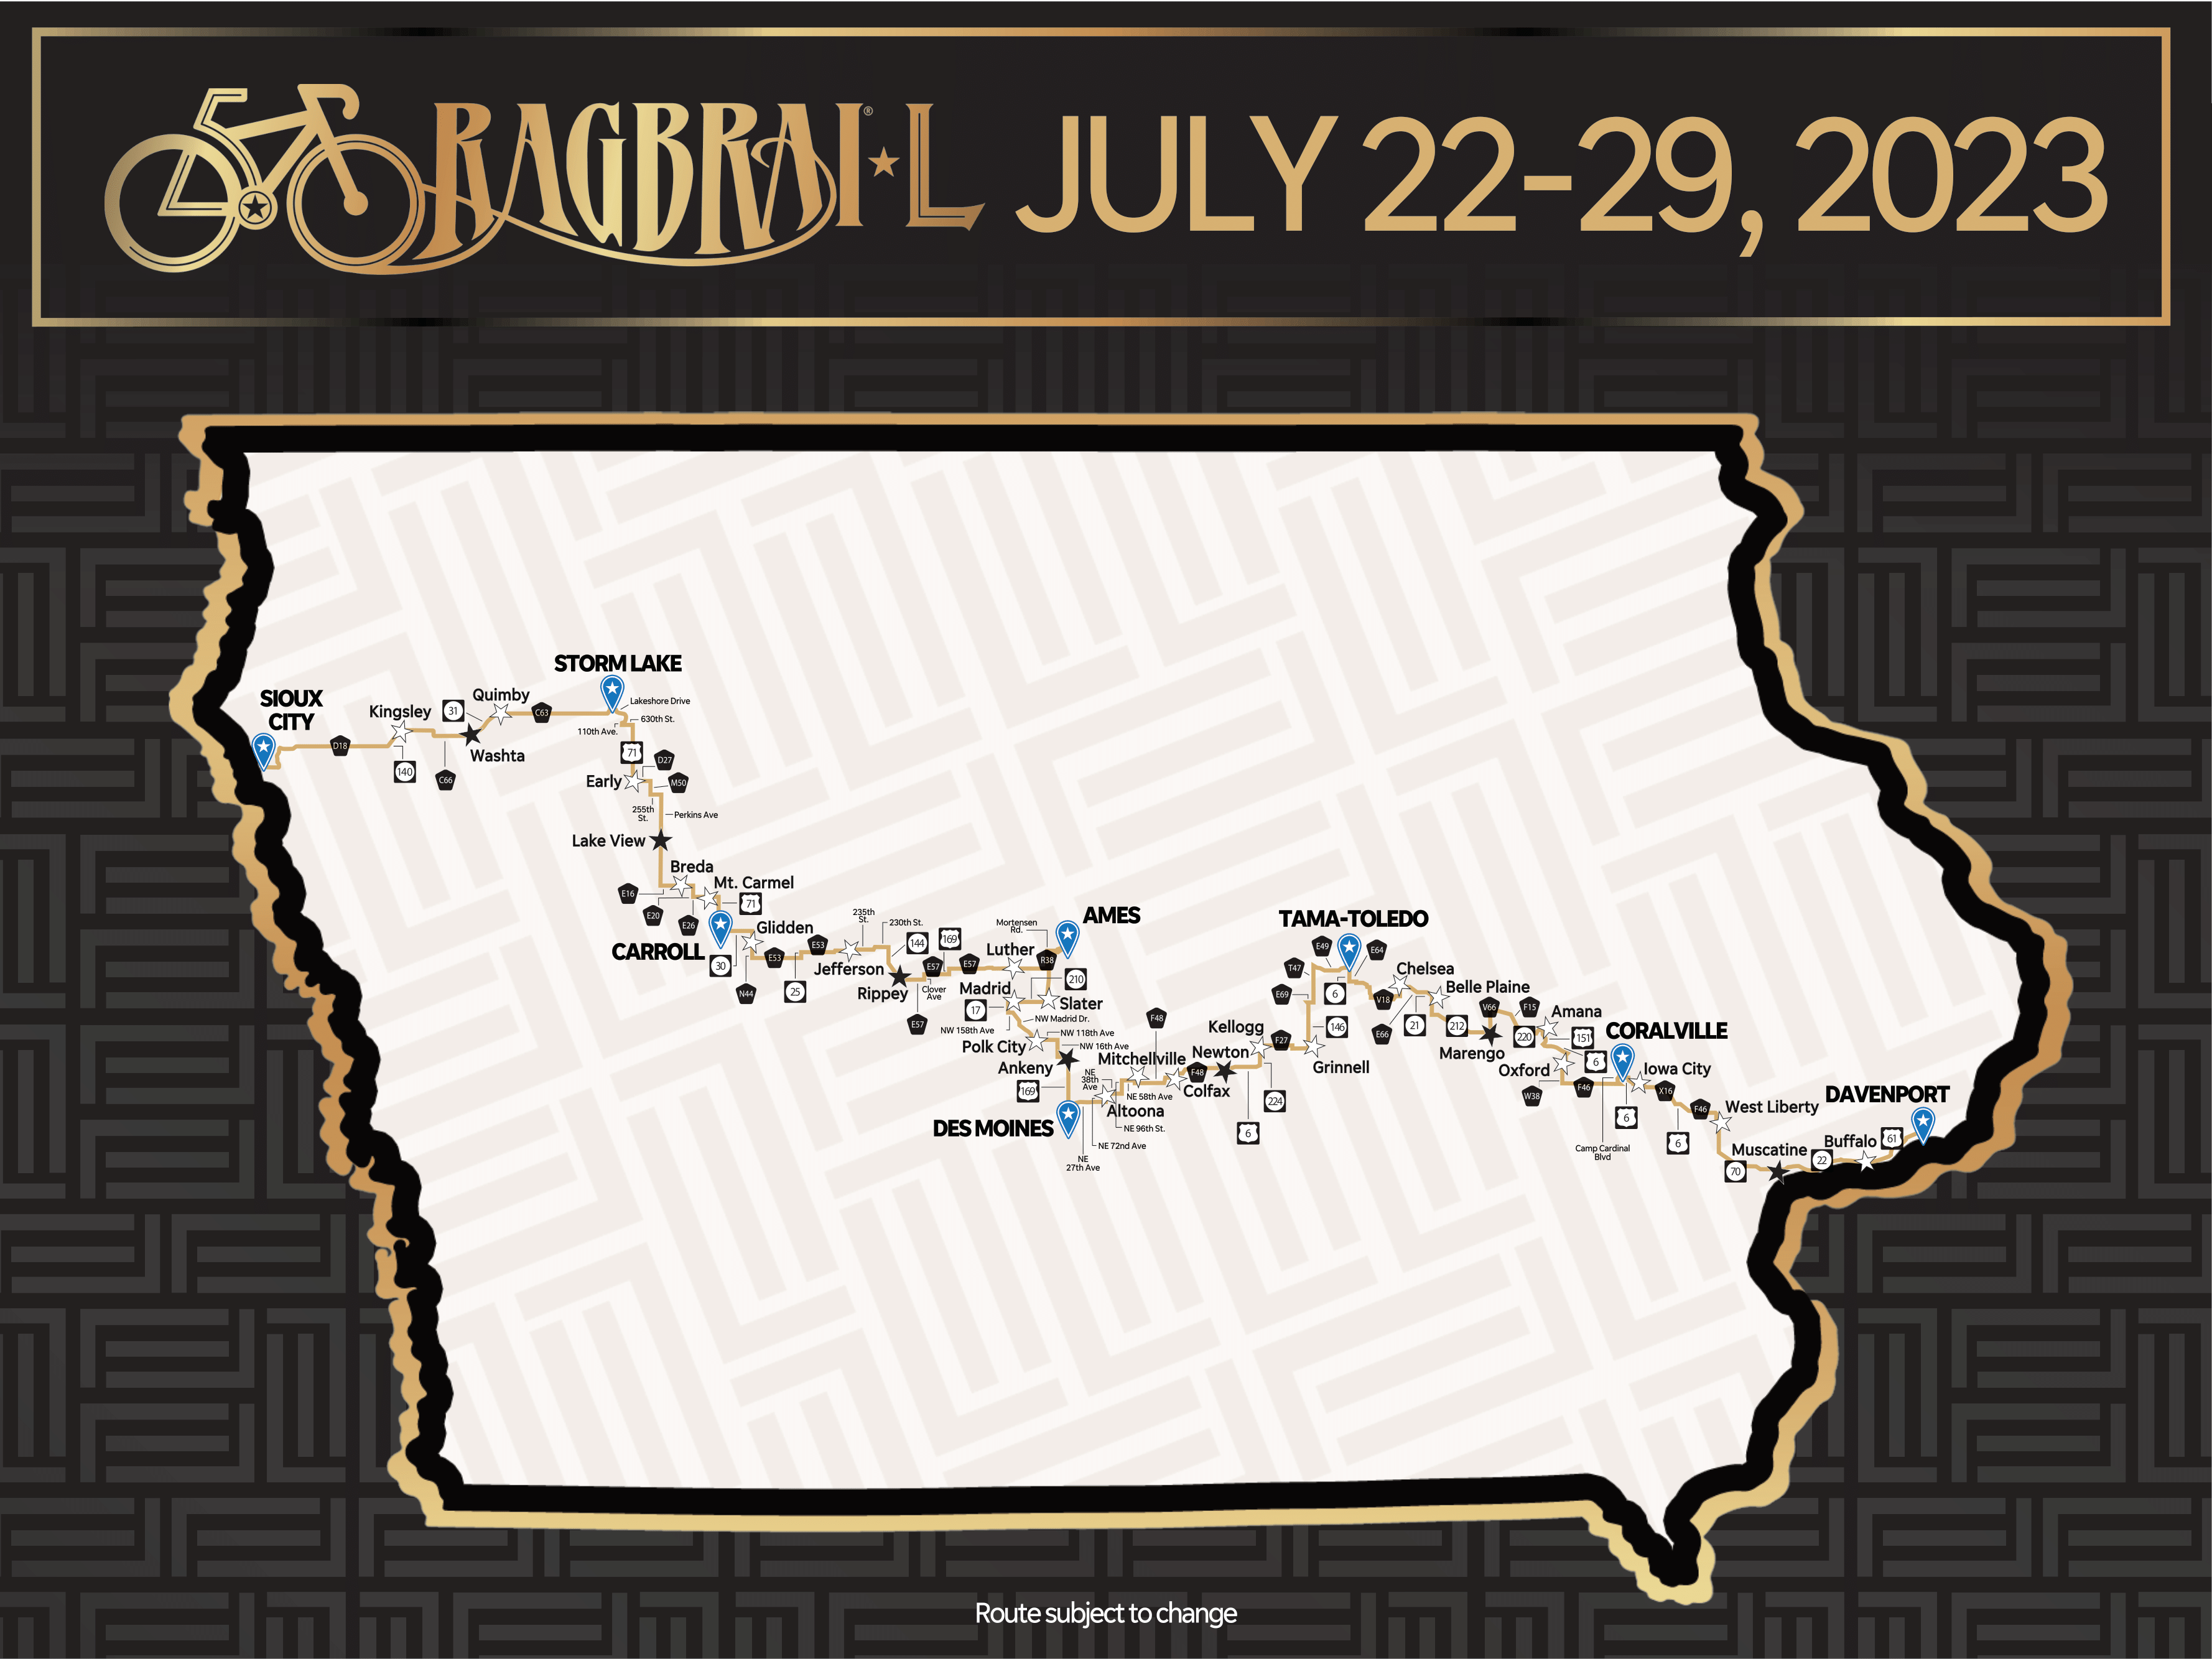 Jefferson, Rippey Pass Through Towns for 2023 RAGBRAI Raccoon Valley